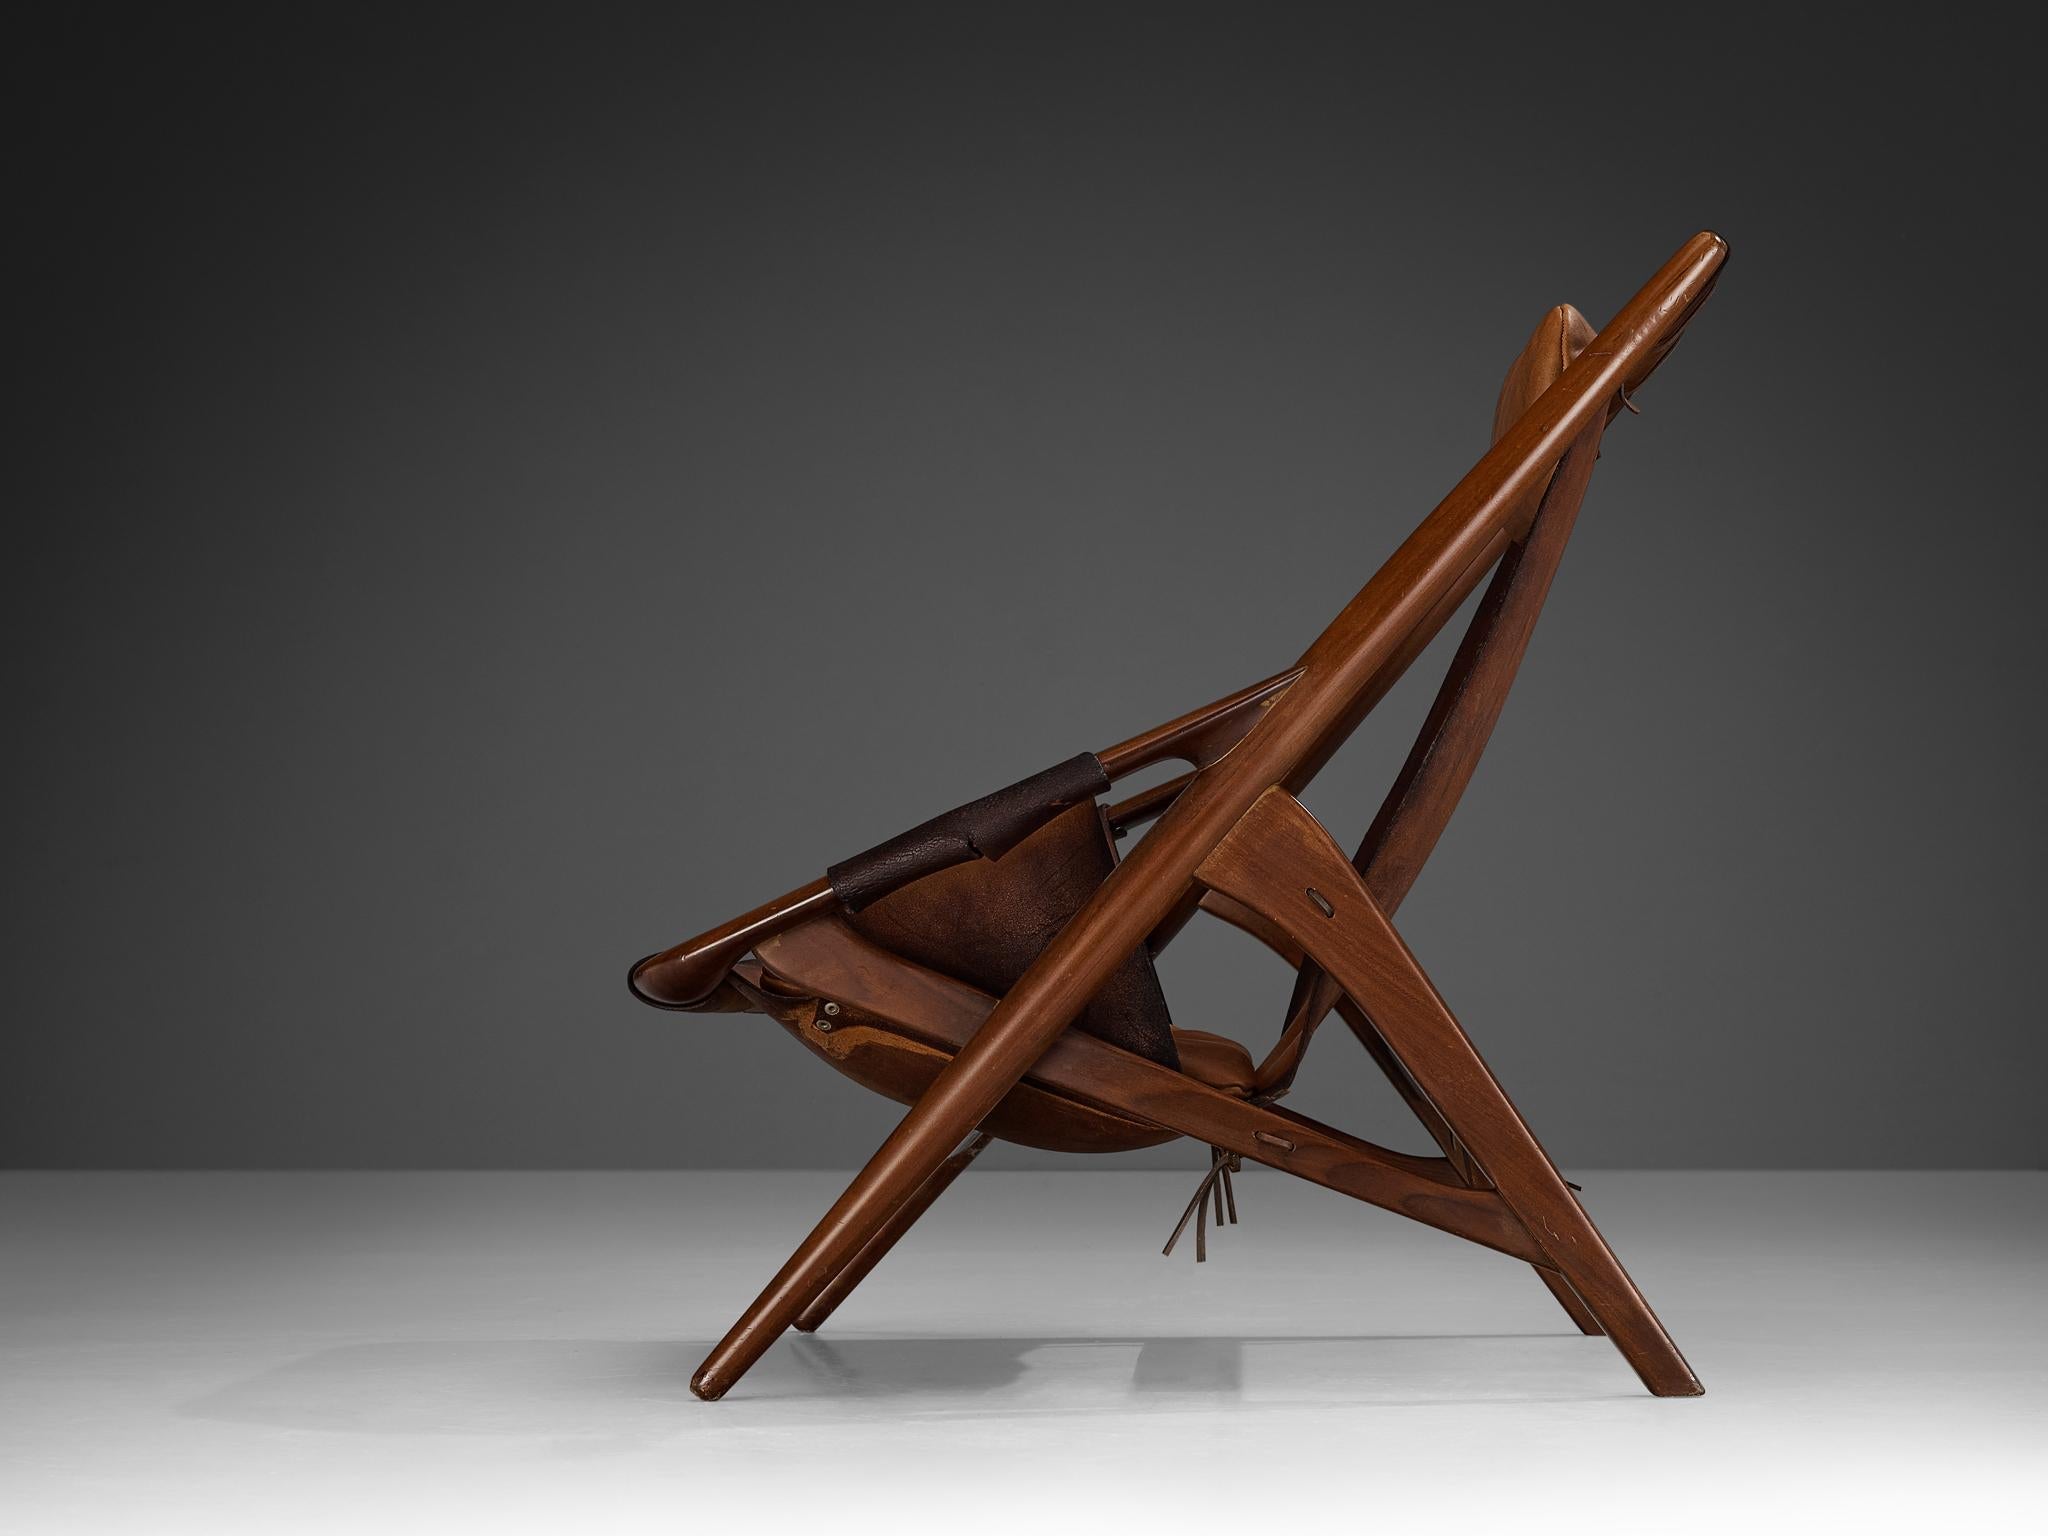 W. Andersag Lounge Chair in Patinated Cognac Leather and Teak